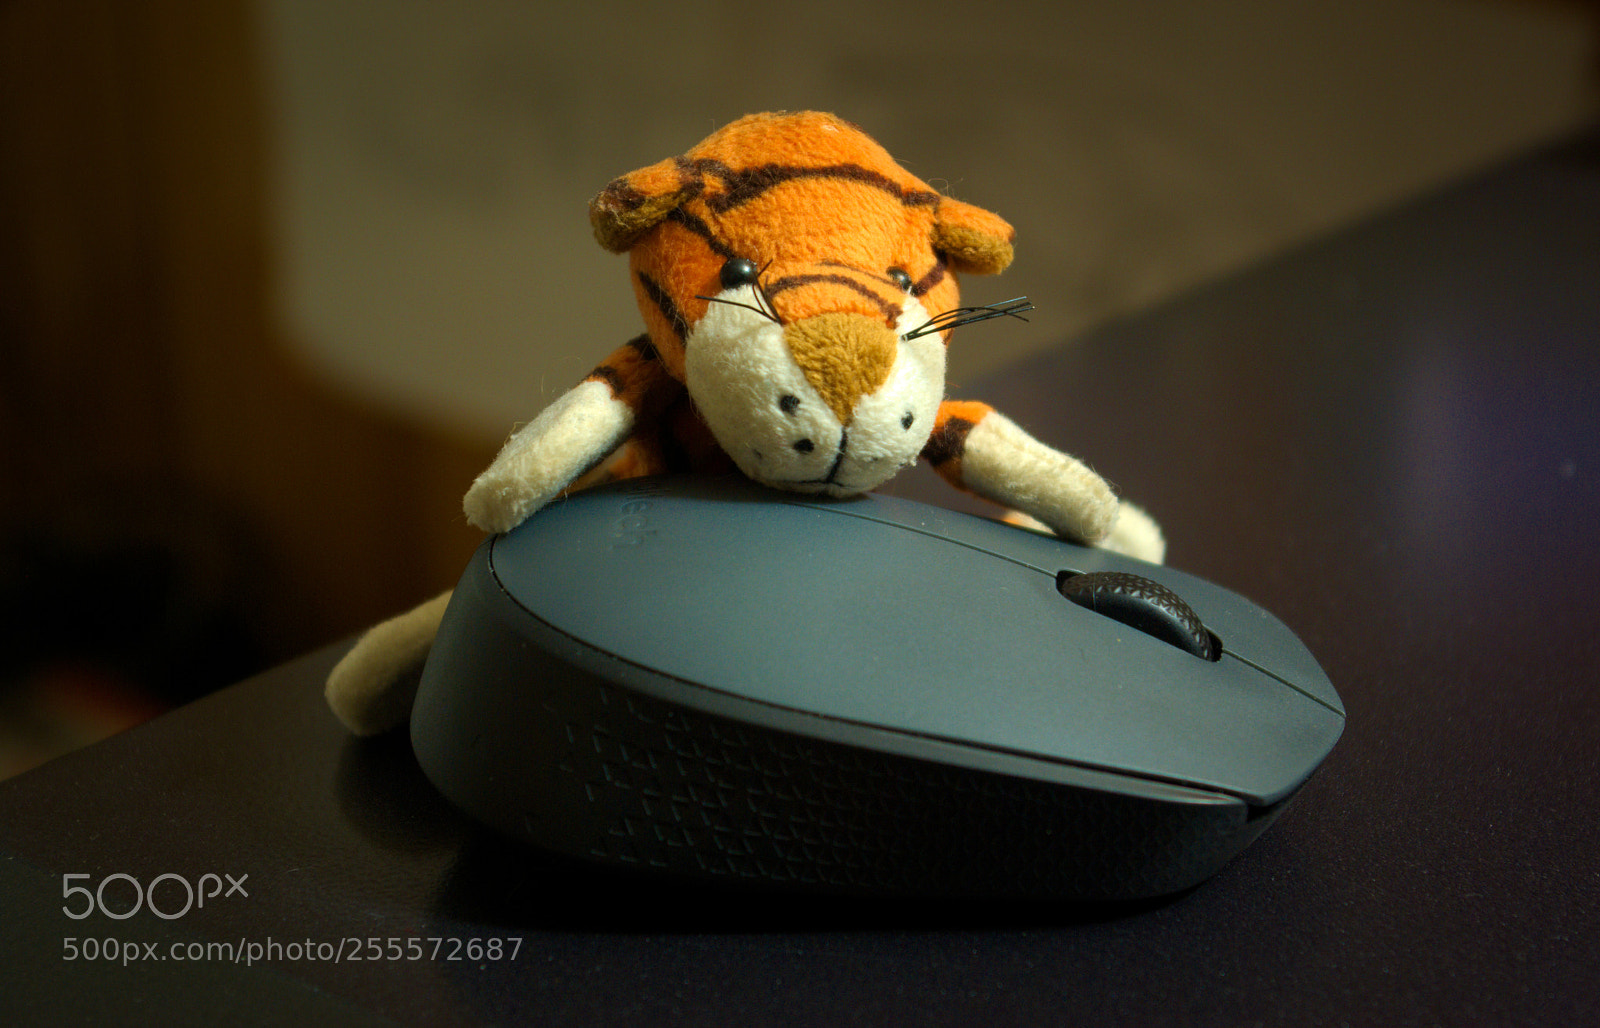 Pentax K10D sample photo. The mouse and the photography